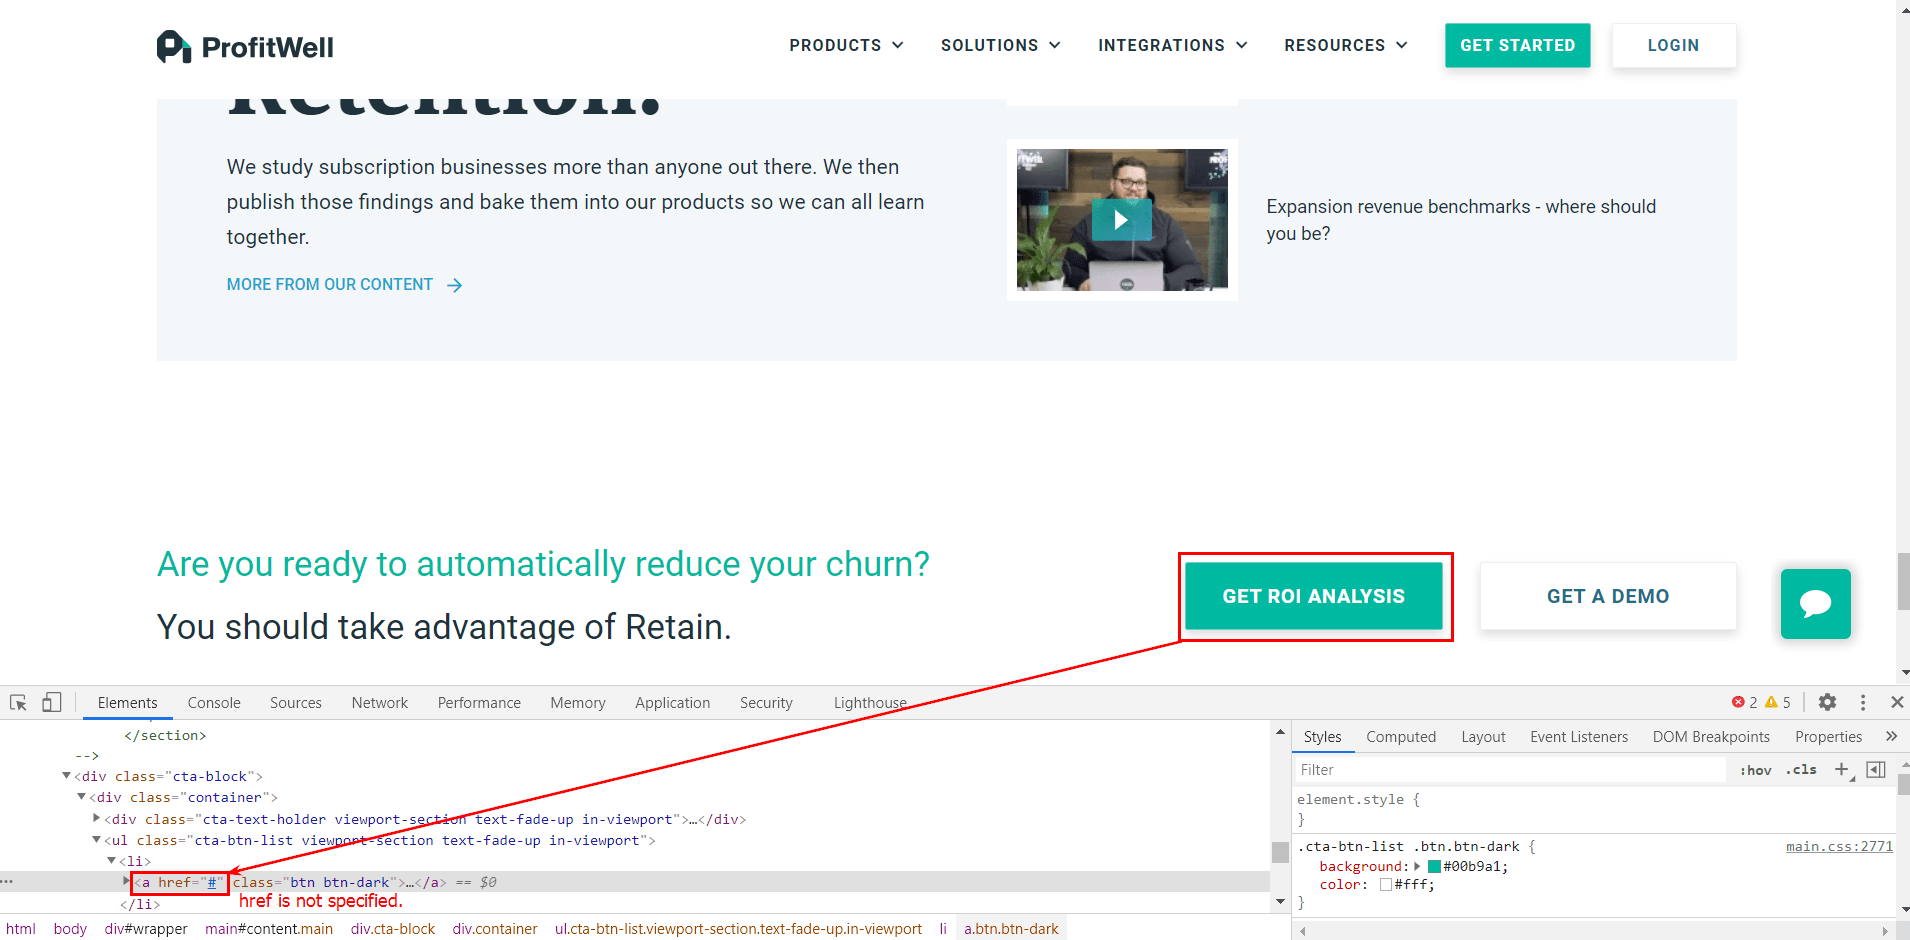 The button 'Get Roi Analysis' does not work properly